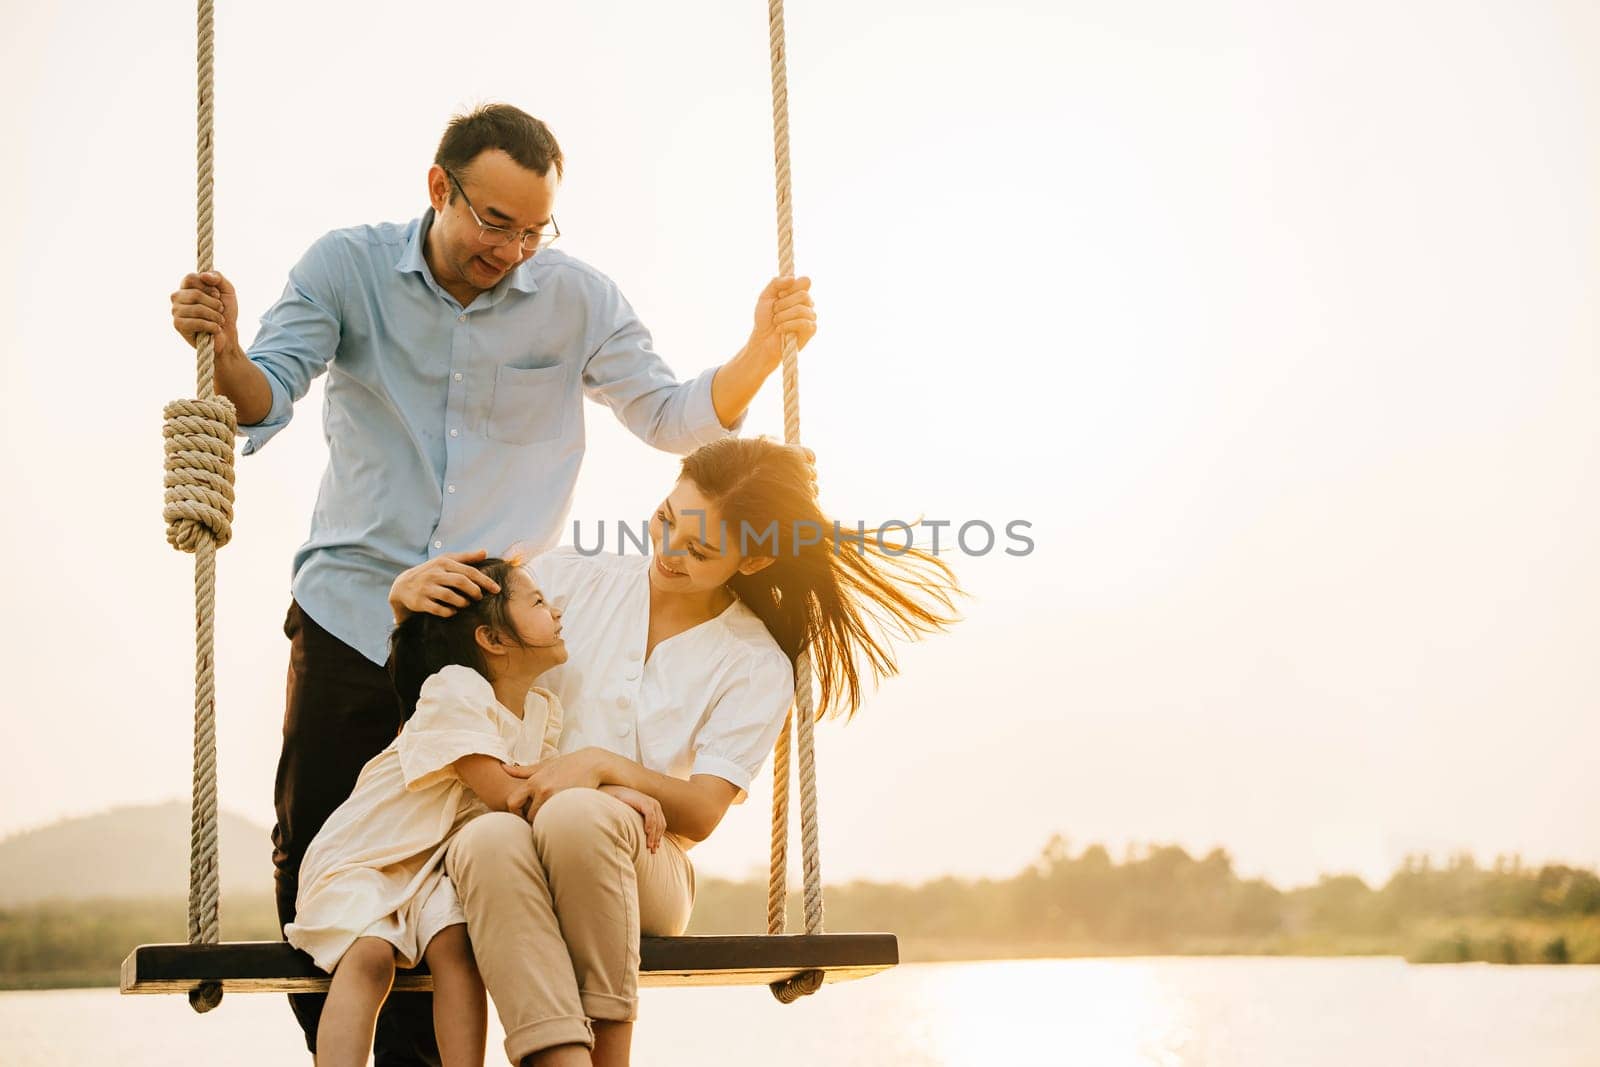 A happy family playing together on a swing set in a beautiful park, with the parents and children laughing and smiling in the sunshine, Happy Family Day